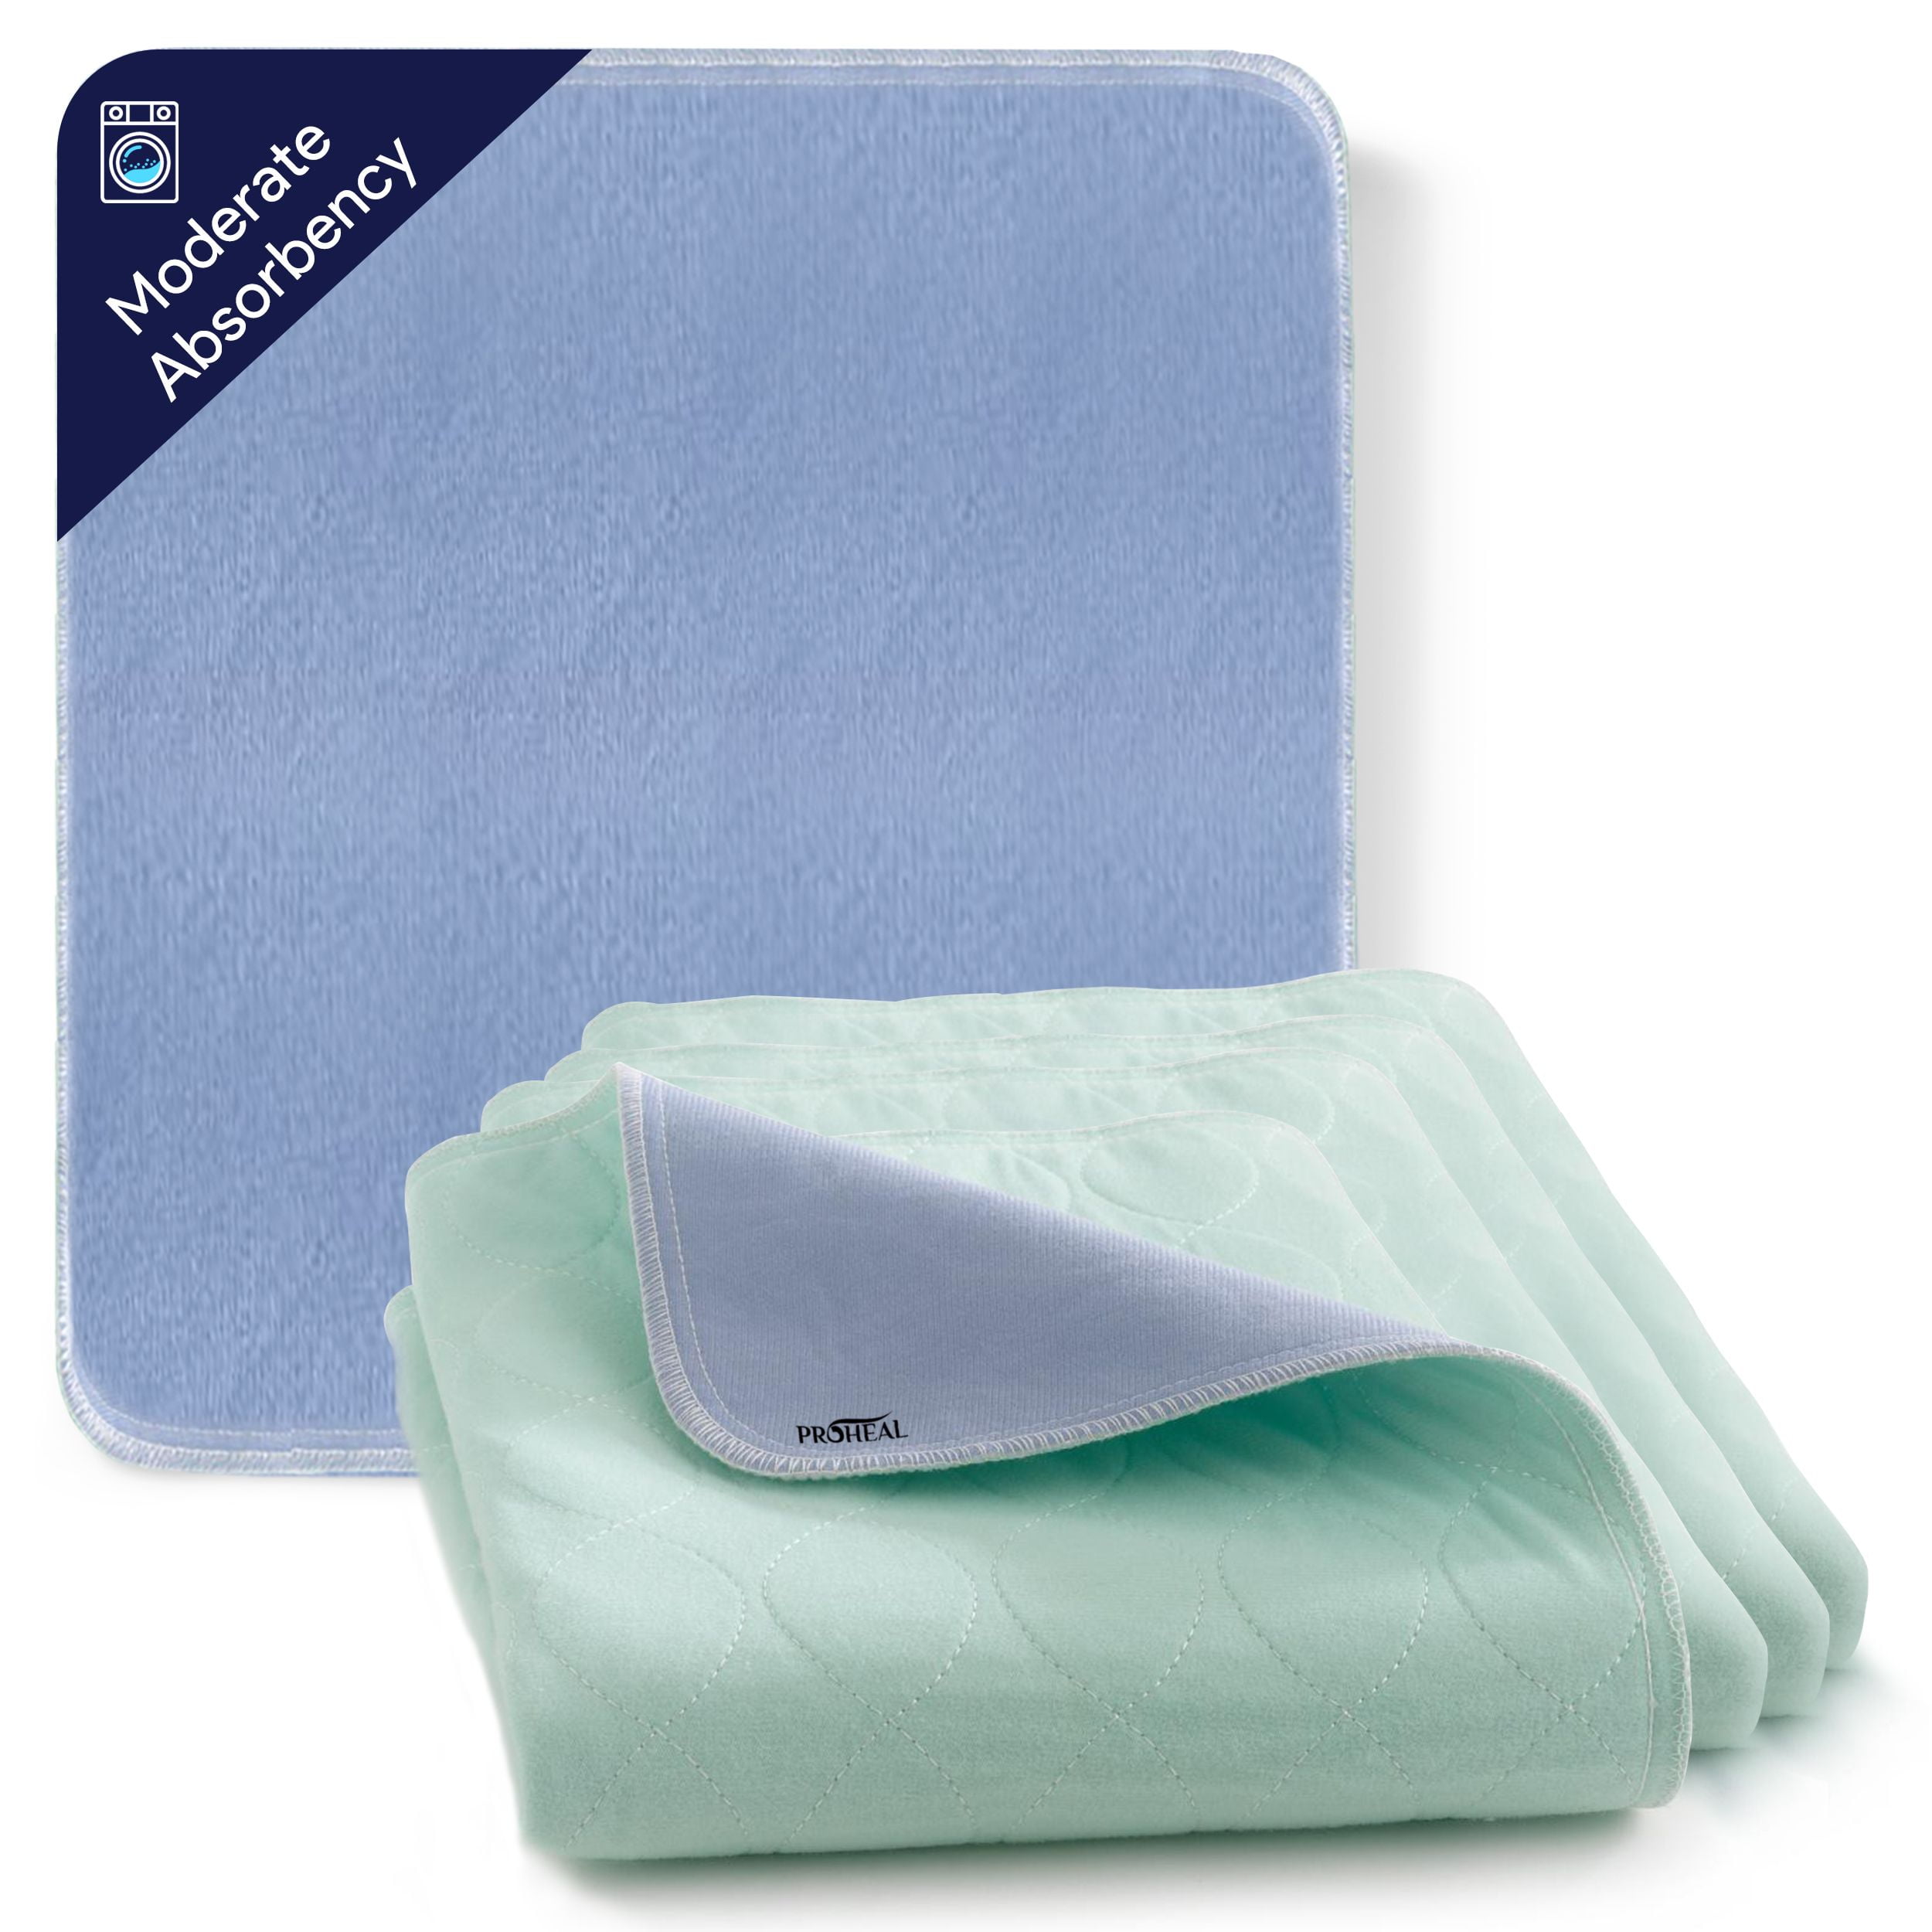 Essential Quik-Sorb Underpad : 34x36 reusable incontinence pad